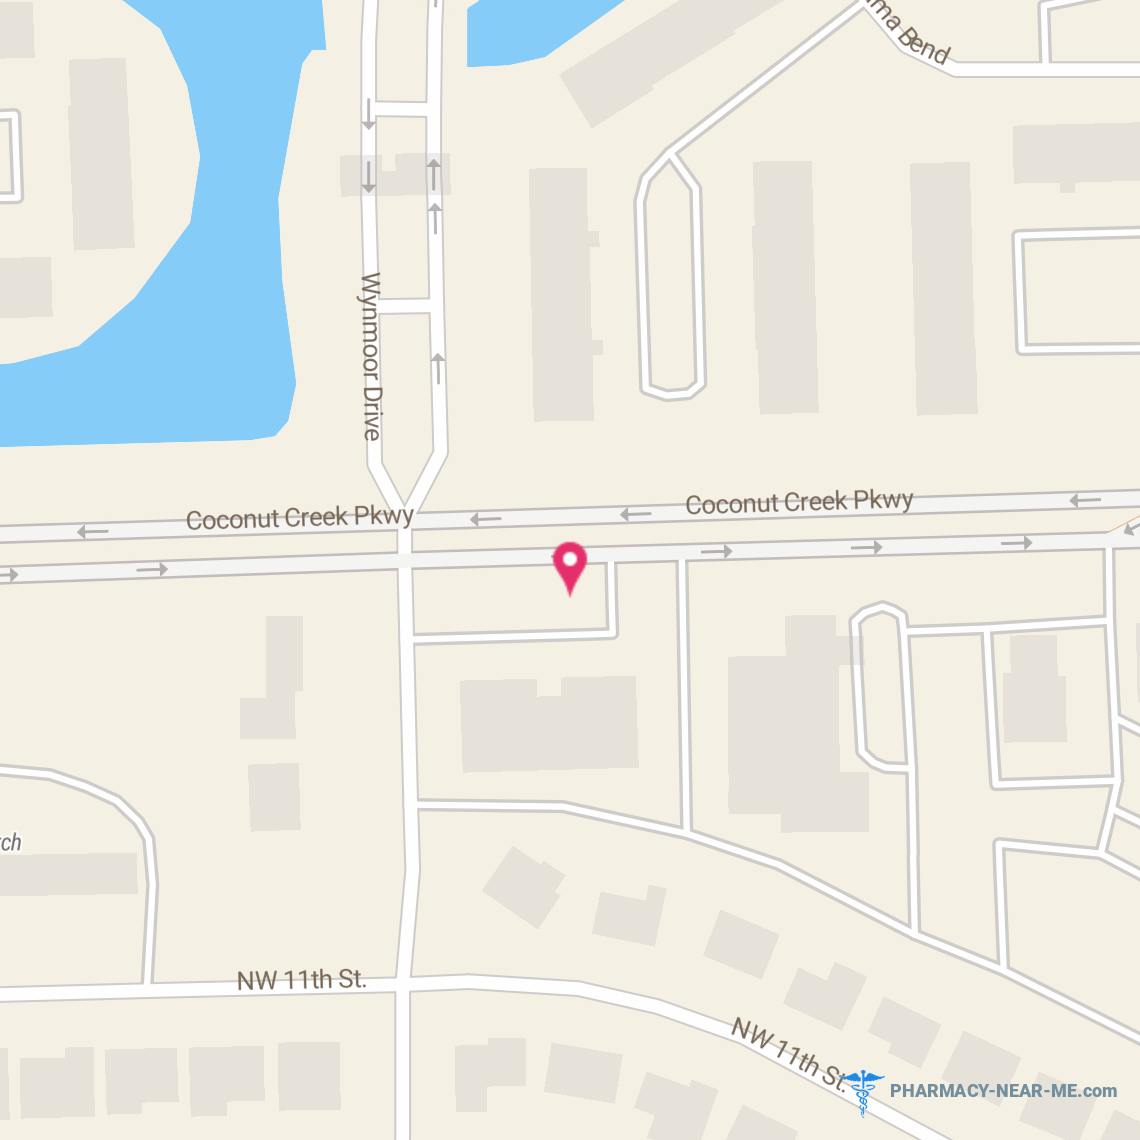 PHARMACY MEDICAL SERVICES INC #2 - Pharmacy Hours, Phone, Reviews & Information: 3850 Coconut Creek Parkway, Coconut Creek, Florida 33066, United States